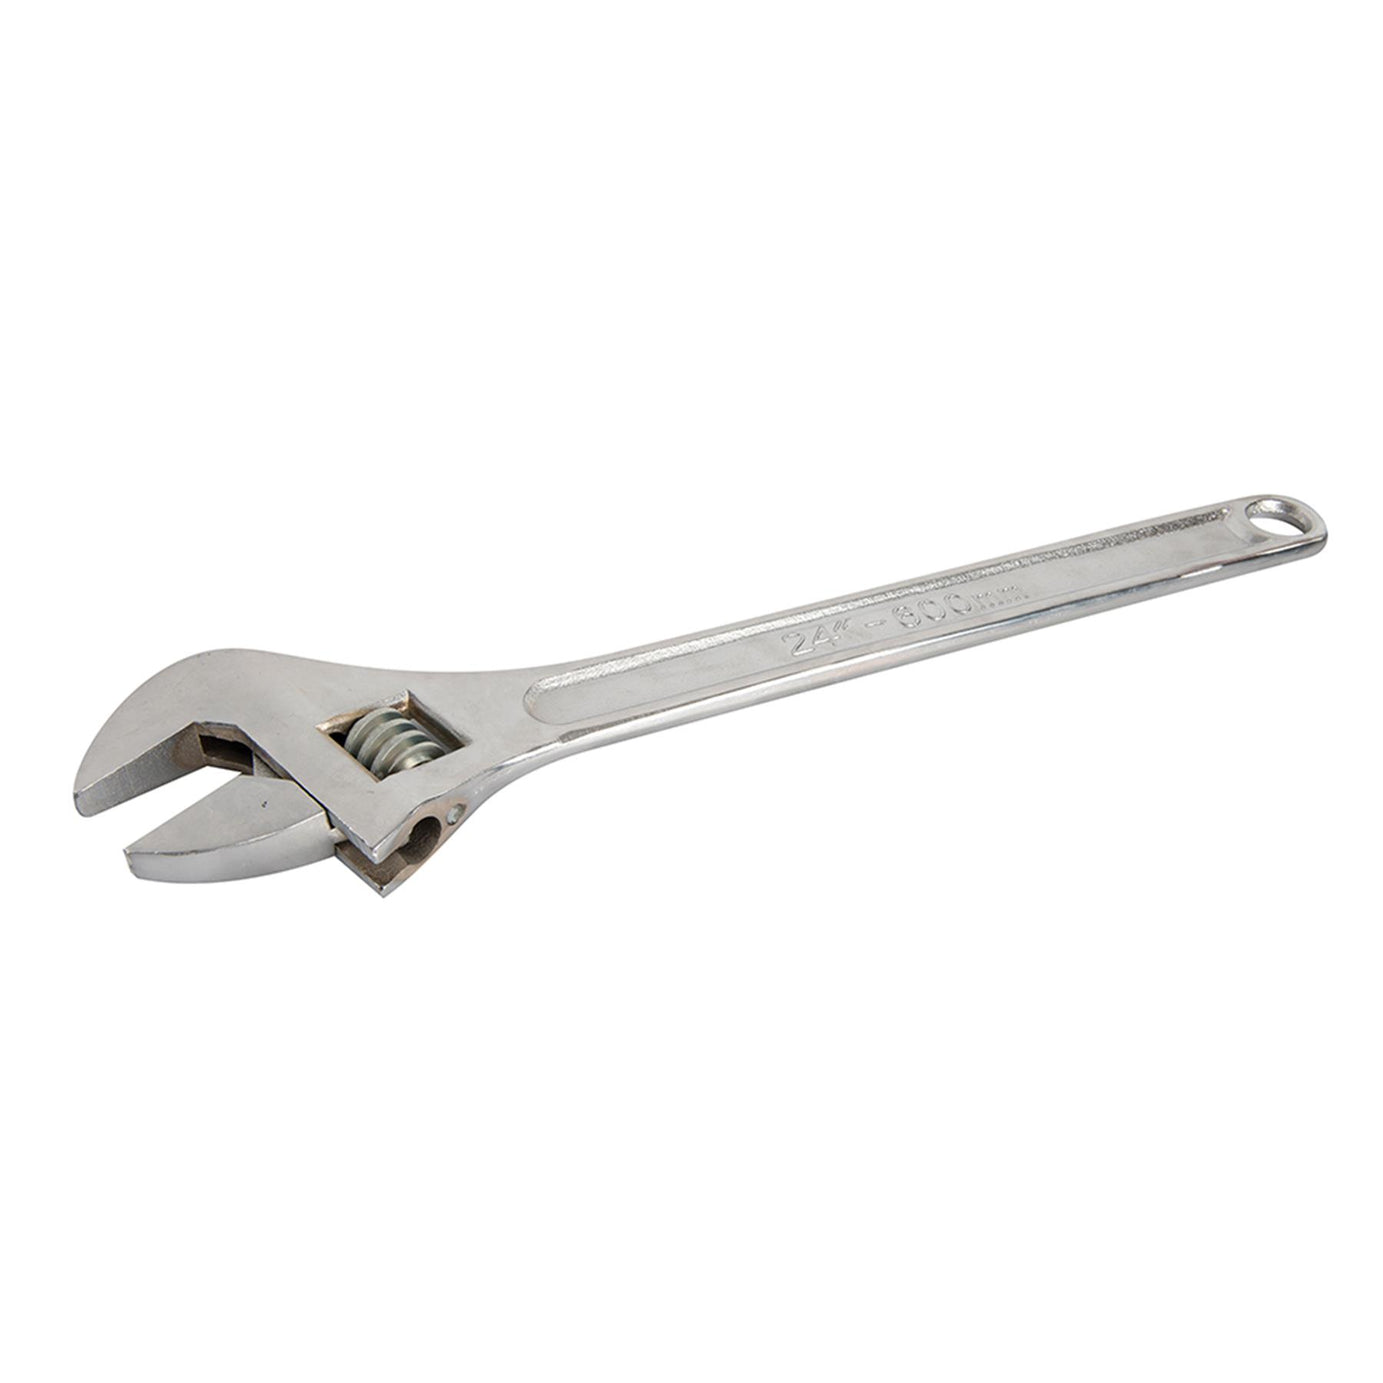 Adjustable Wrench 600mm Length - Jaw 57mm Drop-Forged Chrome Plated New